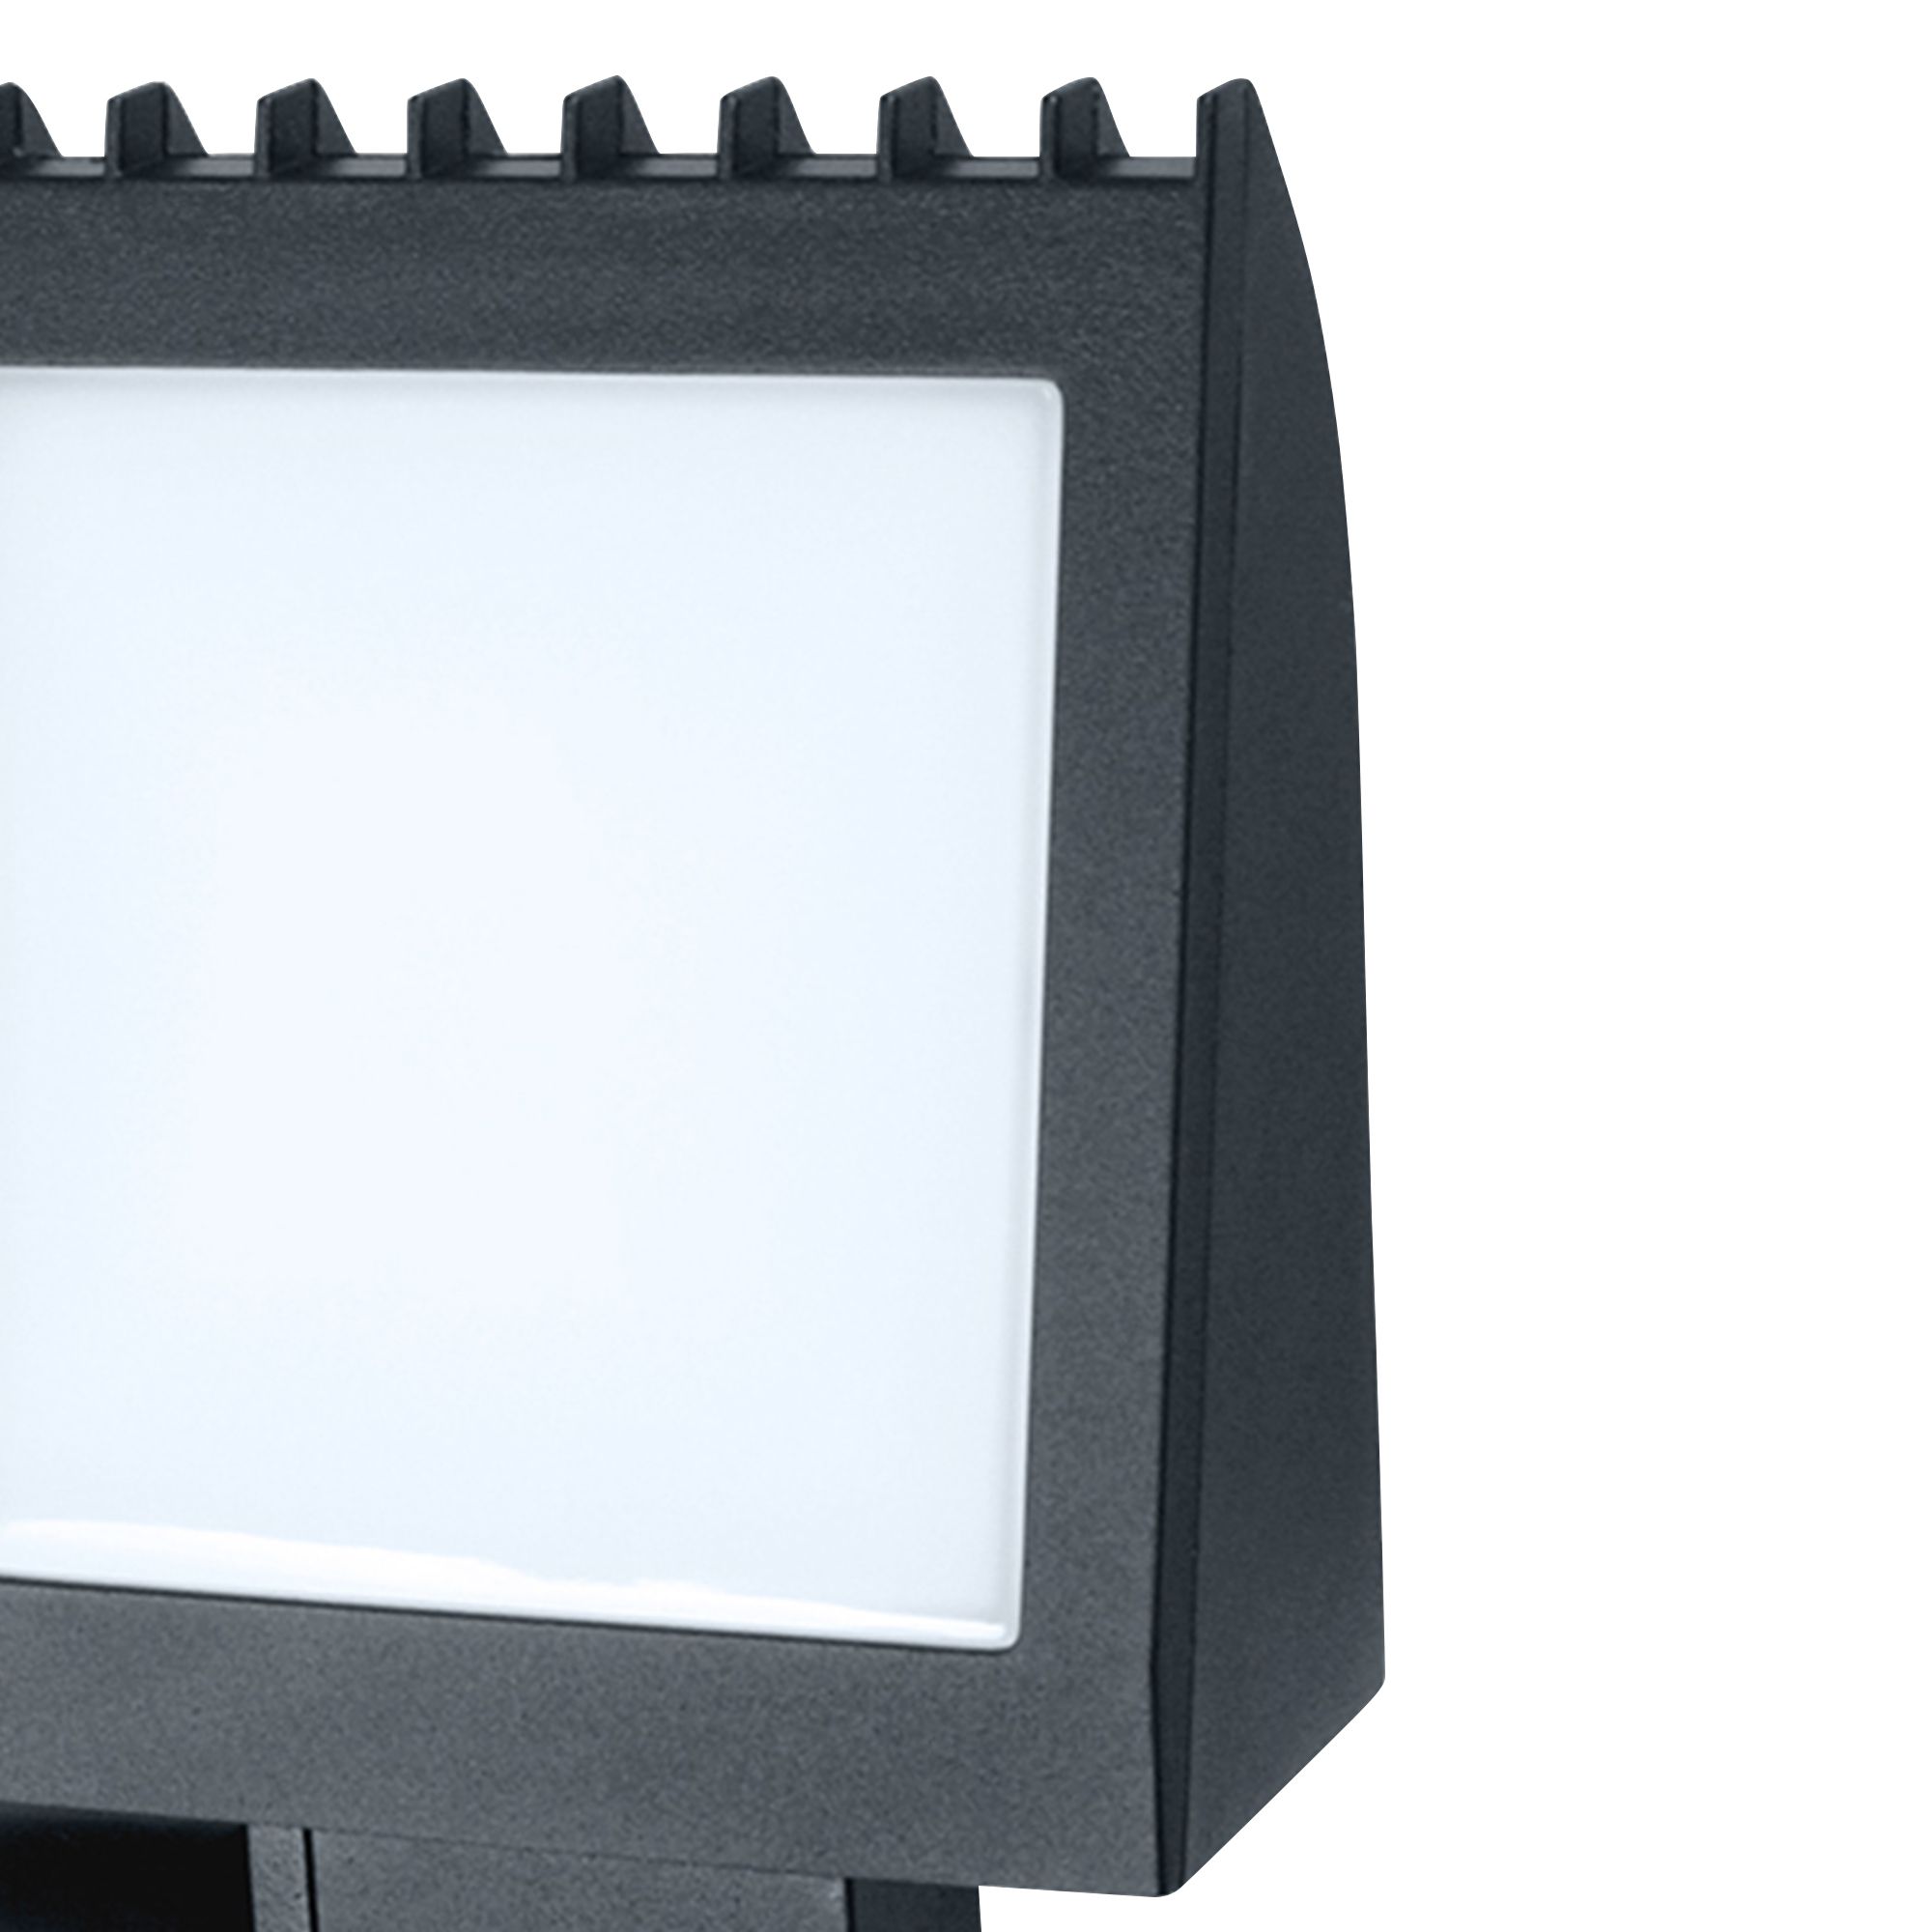 Parksville AR0218-2B Black Mains-powered Cool white Outdoor LED PIR Floodlight 2600lm